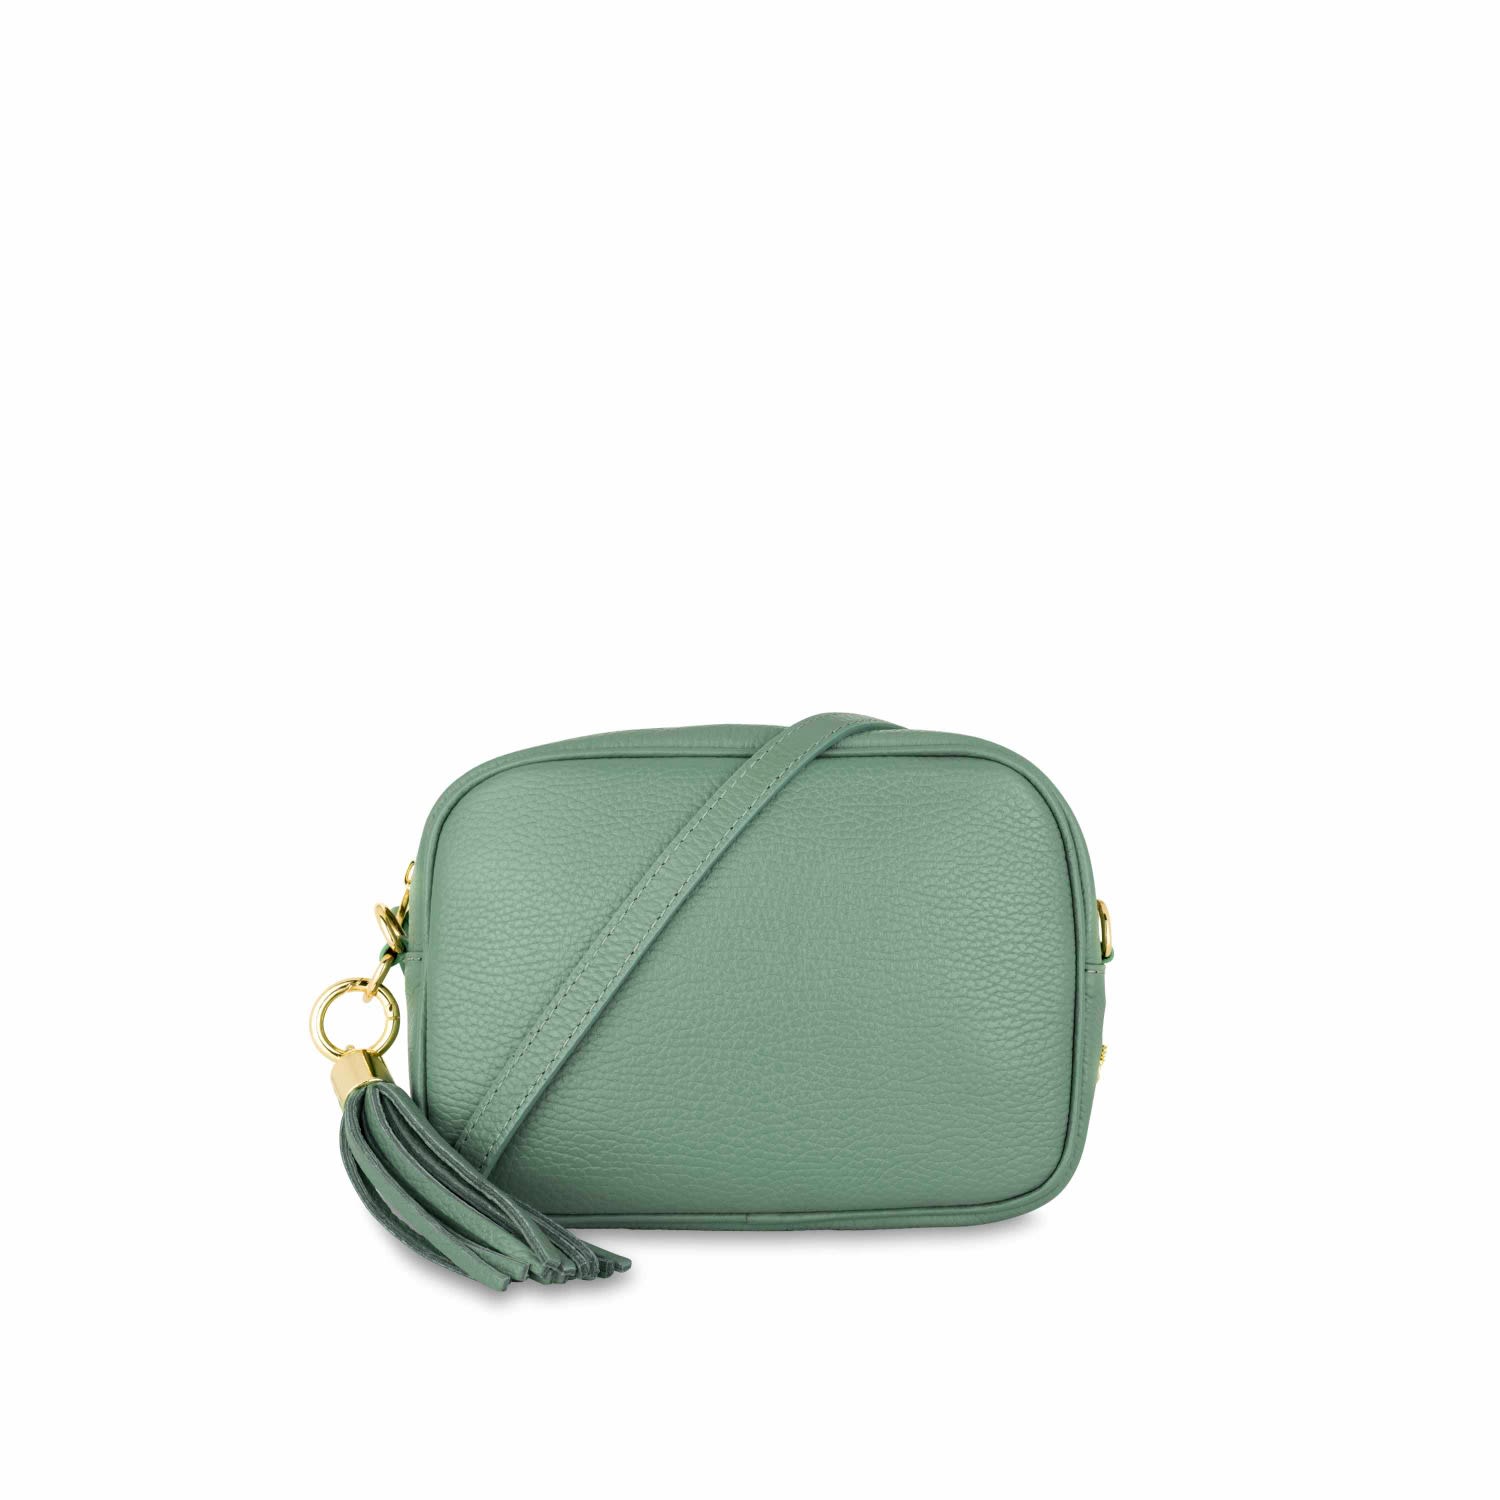 Apatchy London Women's Green The Tassel Pistachio Leather Crossbody Bag